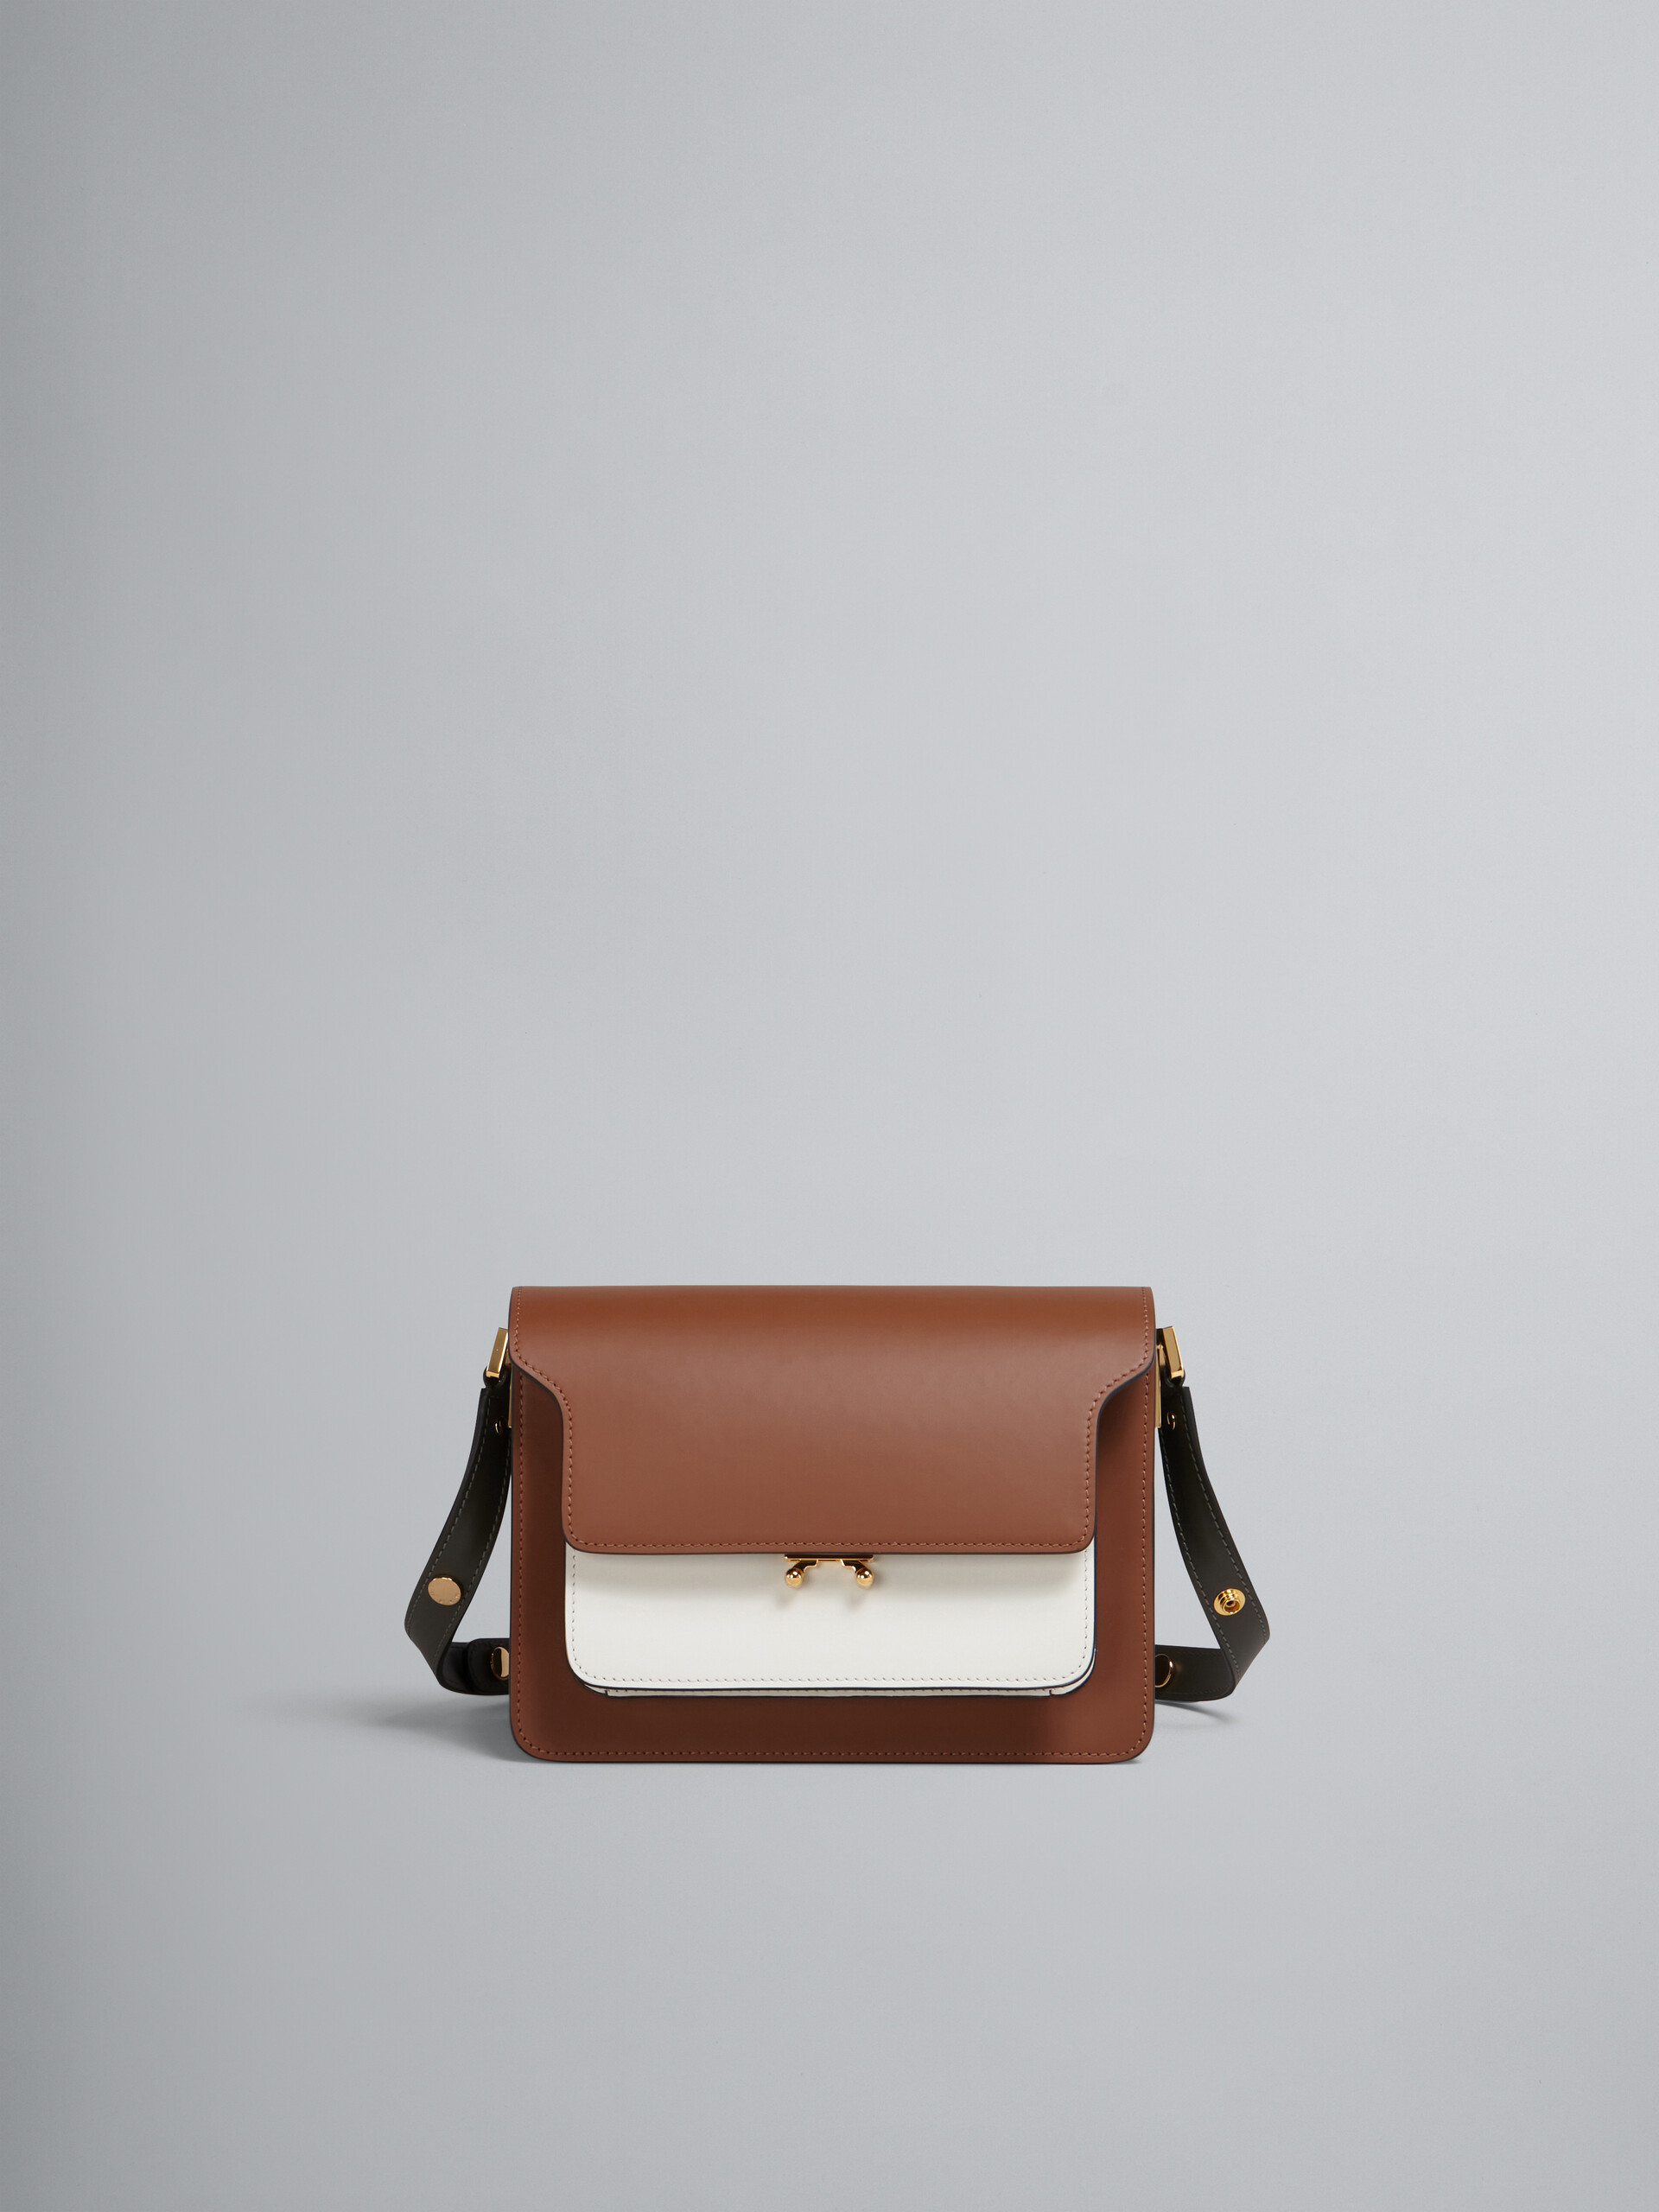 TRUNK media bag in brown white and green leather - Shoulder Bags - Image 1